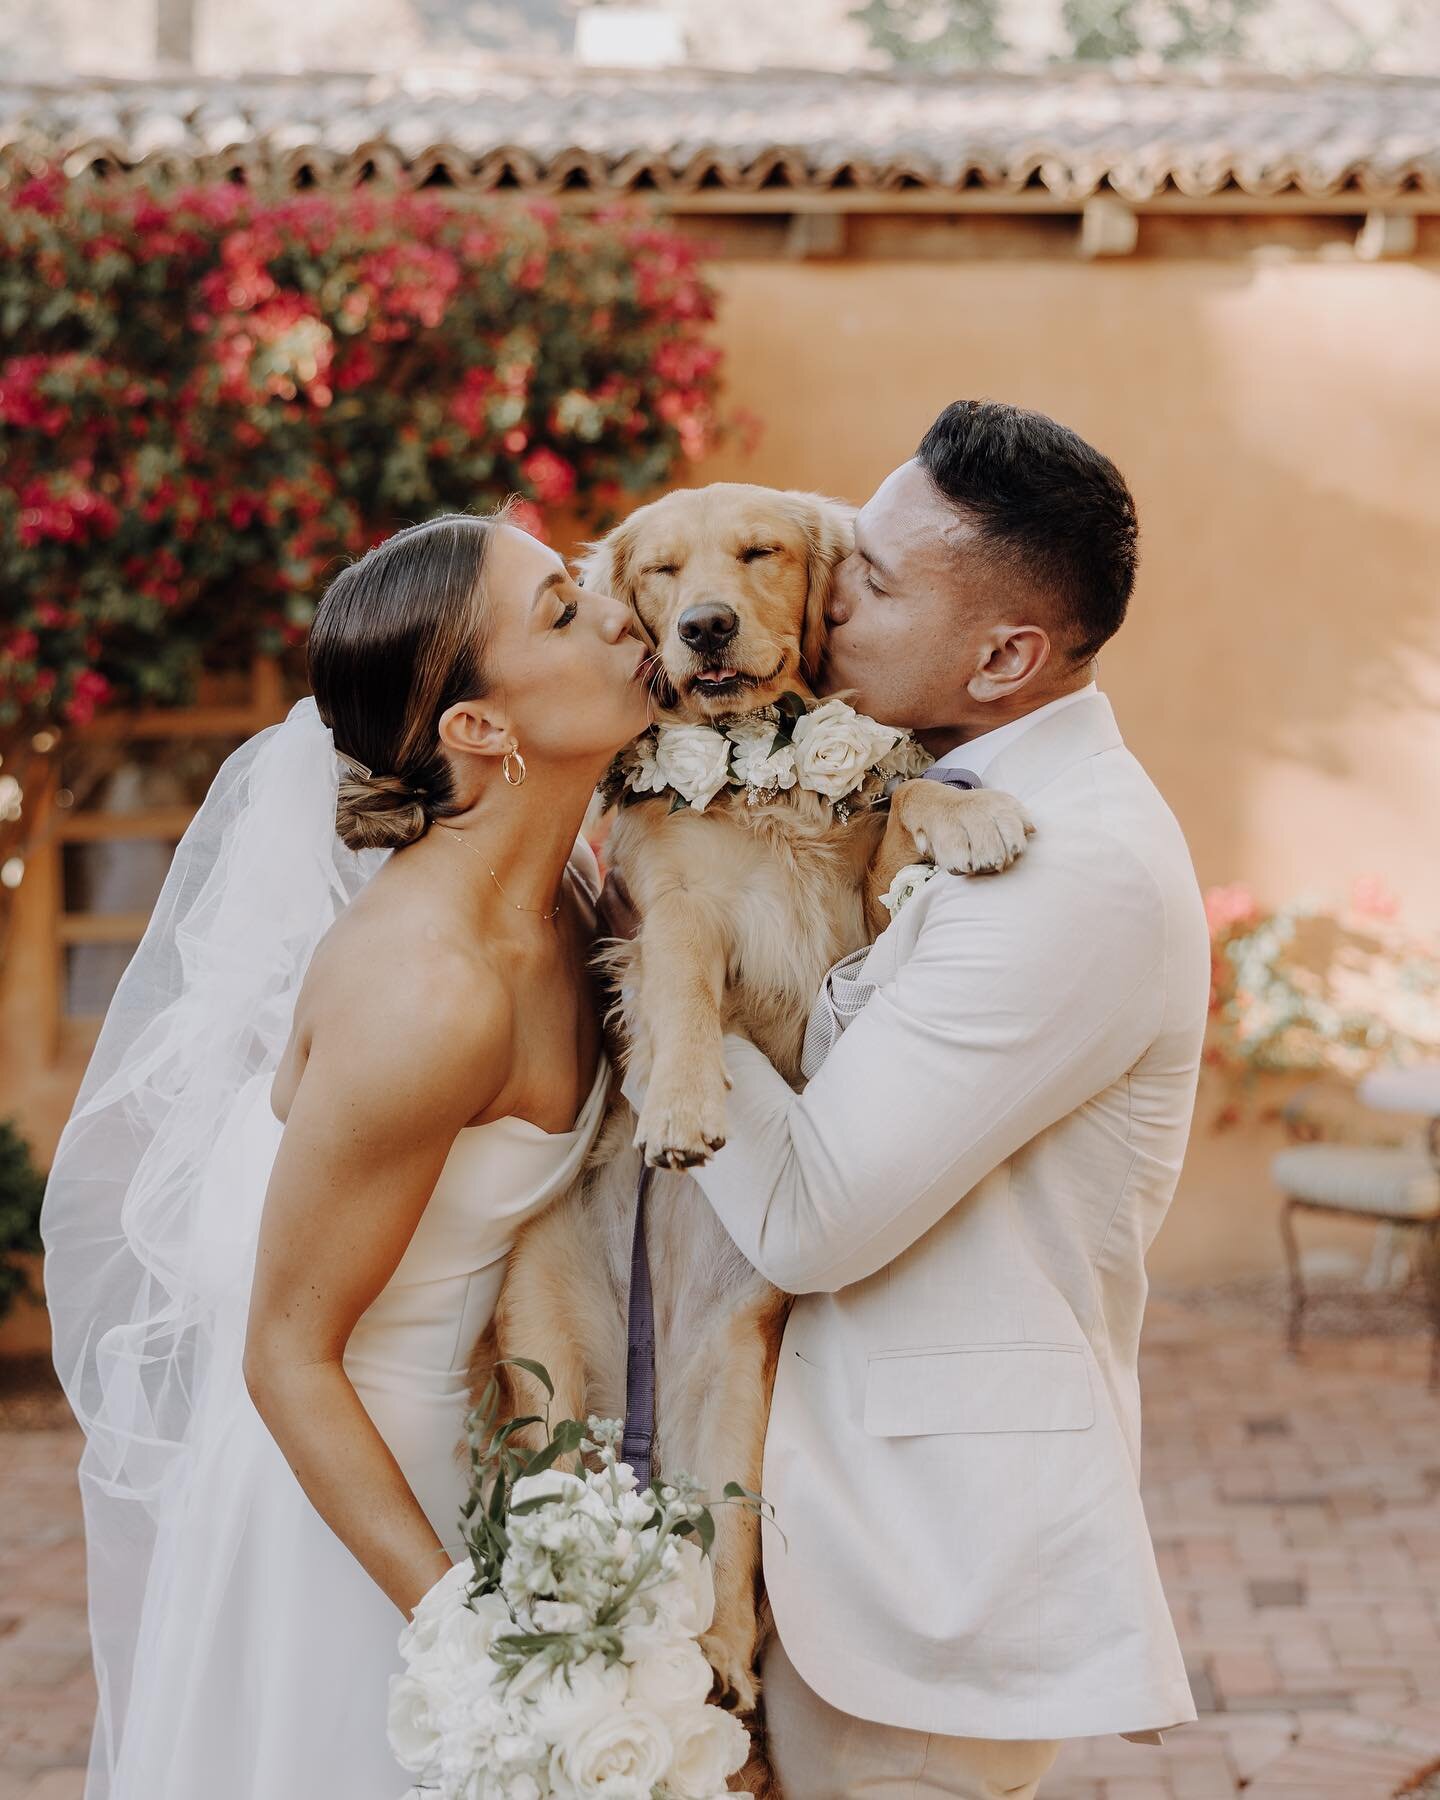 Mr &amp; Mrs Jacobson ✨ 

It&rsquo;s been 3 months since this beautiful wedding at Royal Palms Resort celebrating Harriet &amp; Cole! This day was filled with puppy kisses, happy tears, kind words from family &amp; friends, and sweet memories! Can we